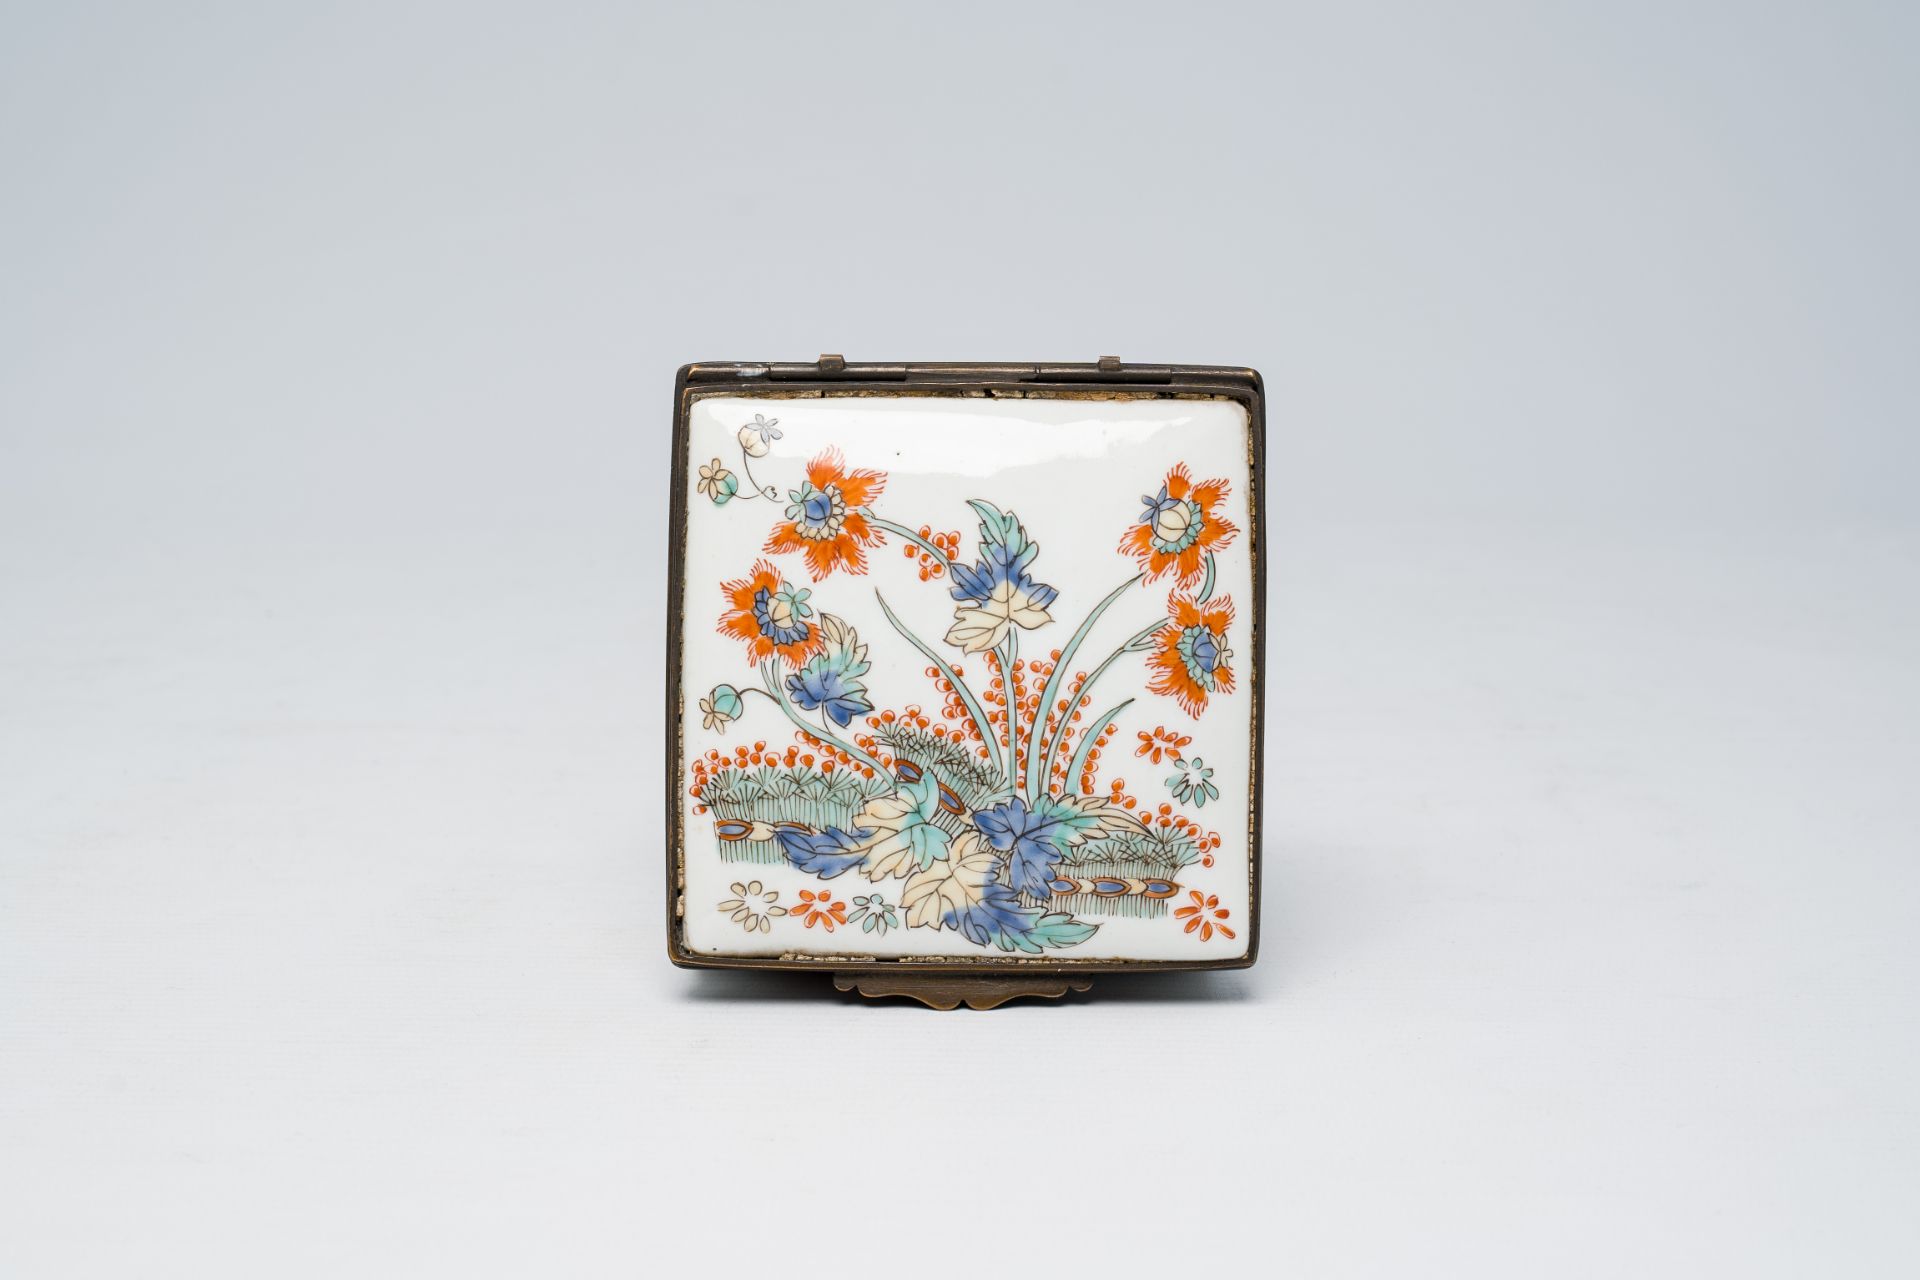 A French Samson Chantilly style box and cover with Kakiemon style floral design, Paris, 19th C. - Image 3 of 8